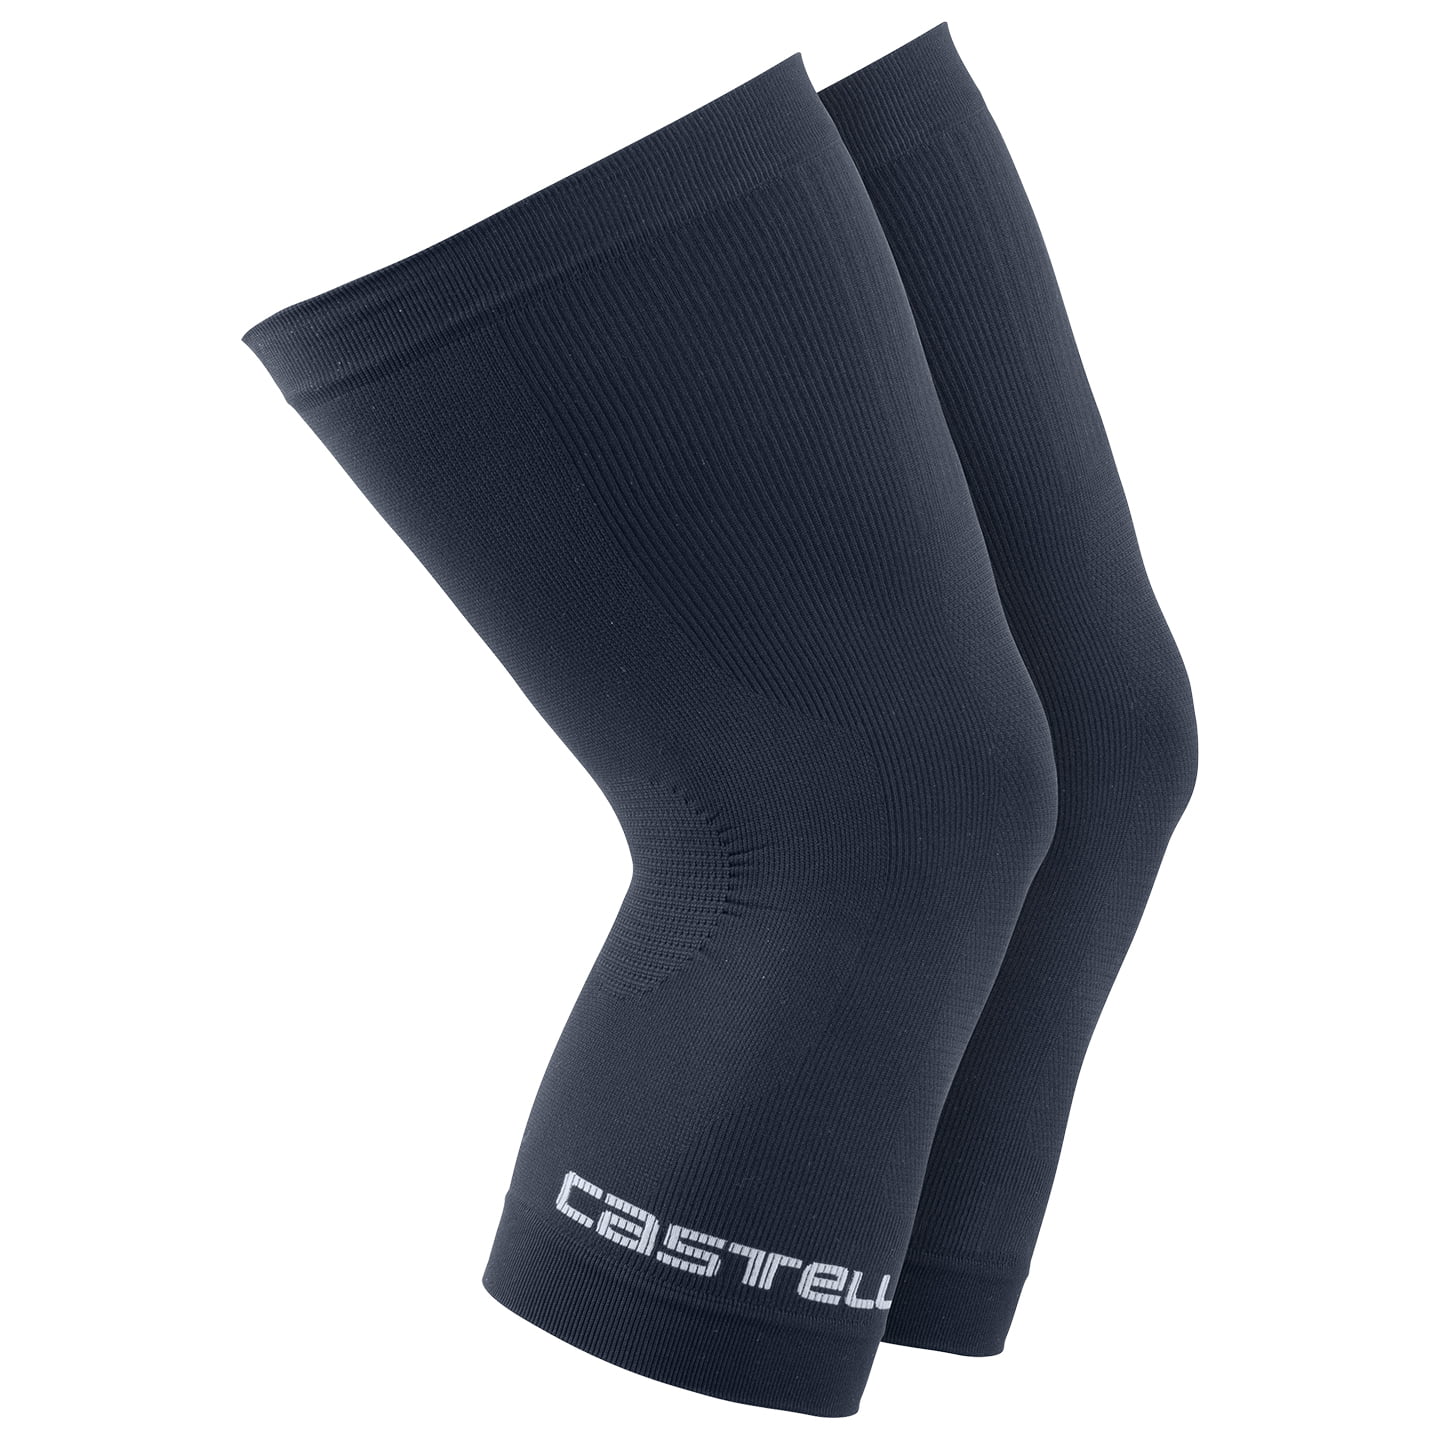 CASTELLI Pro Seamless Knee Warmers Knee Warmers, for men, size S-M, Cycling clothing